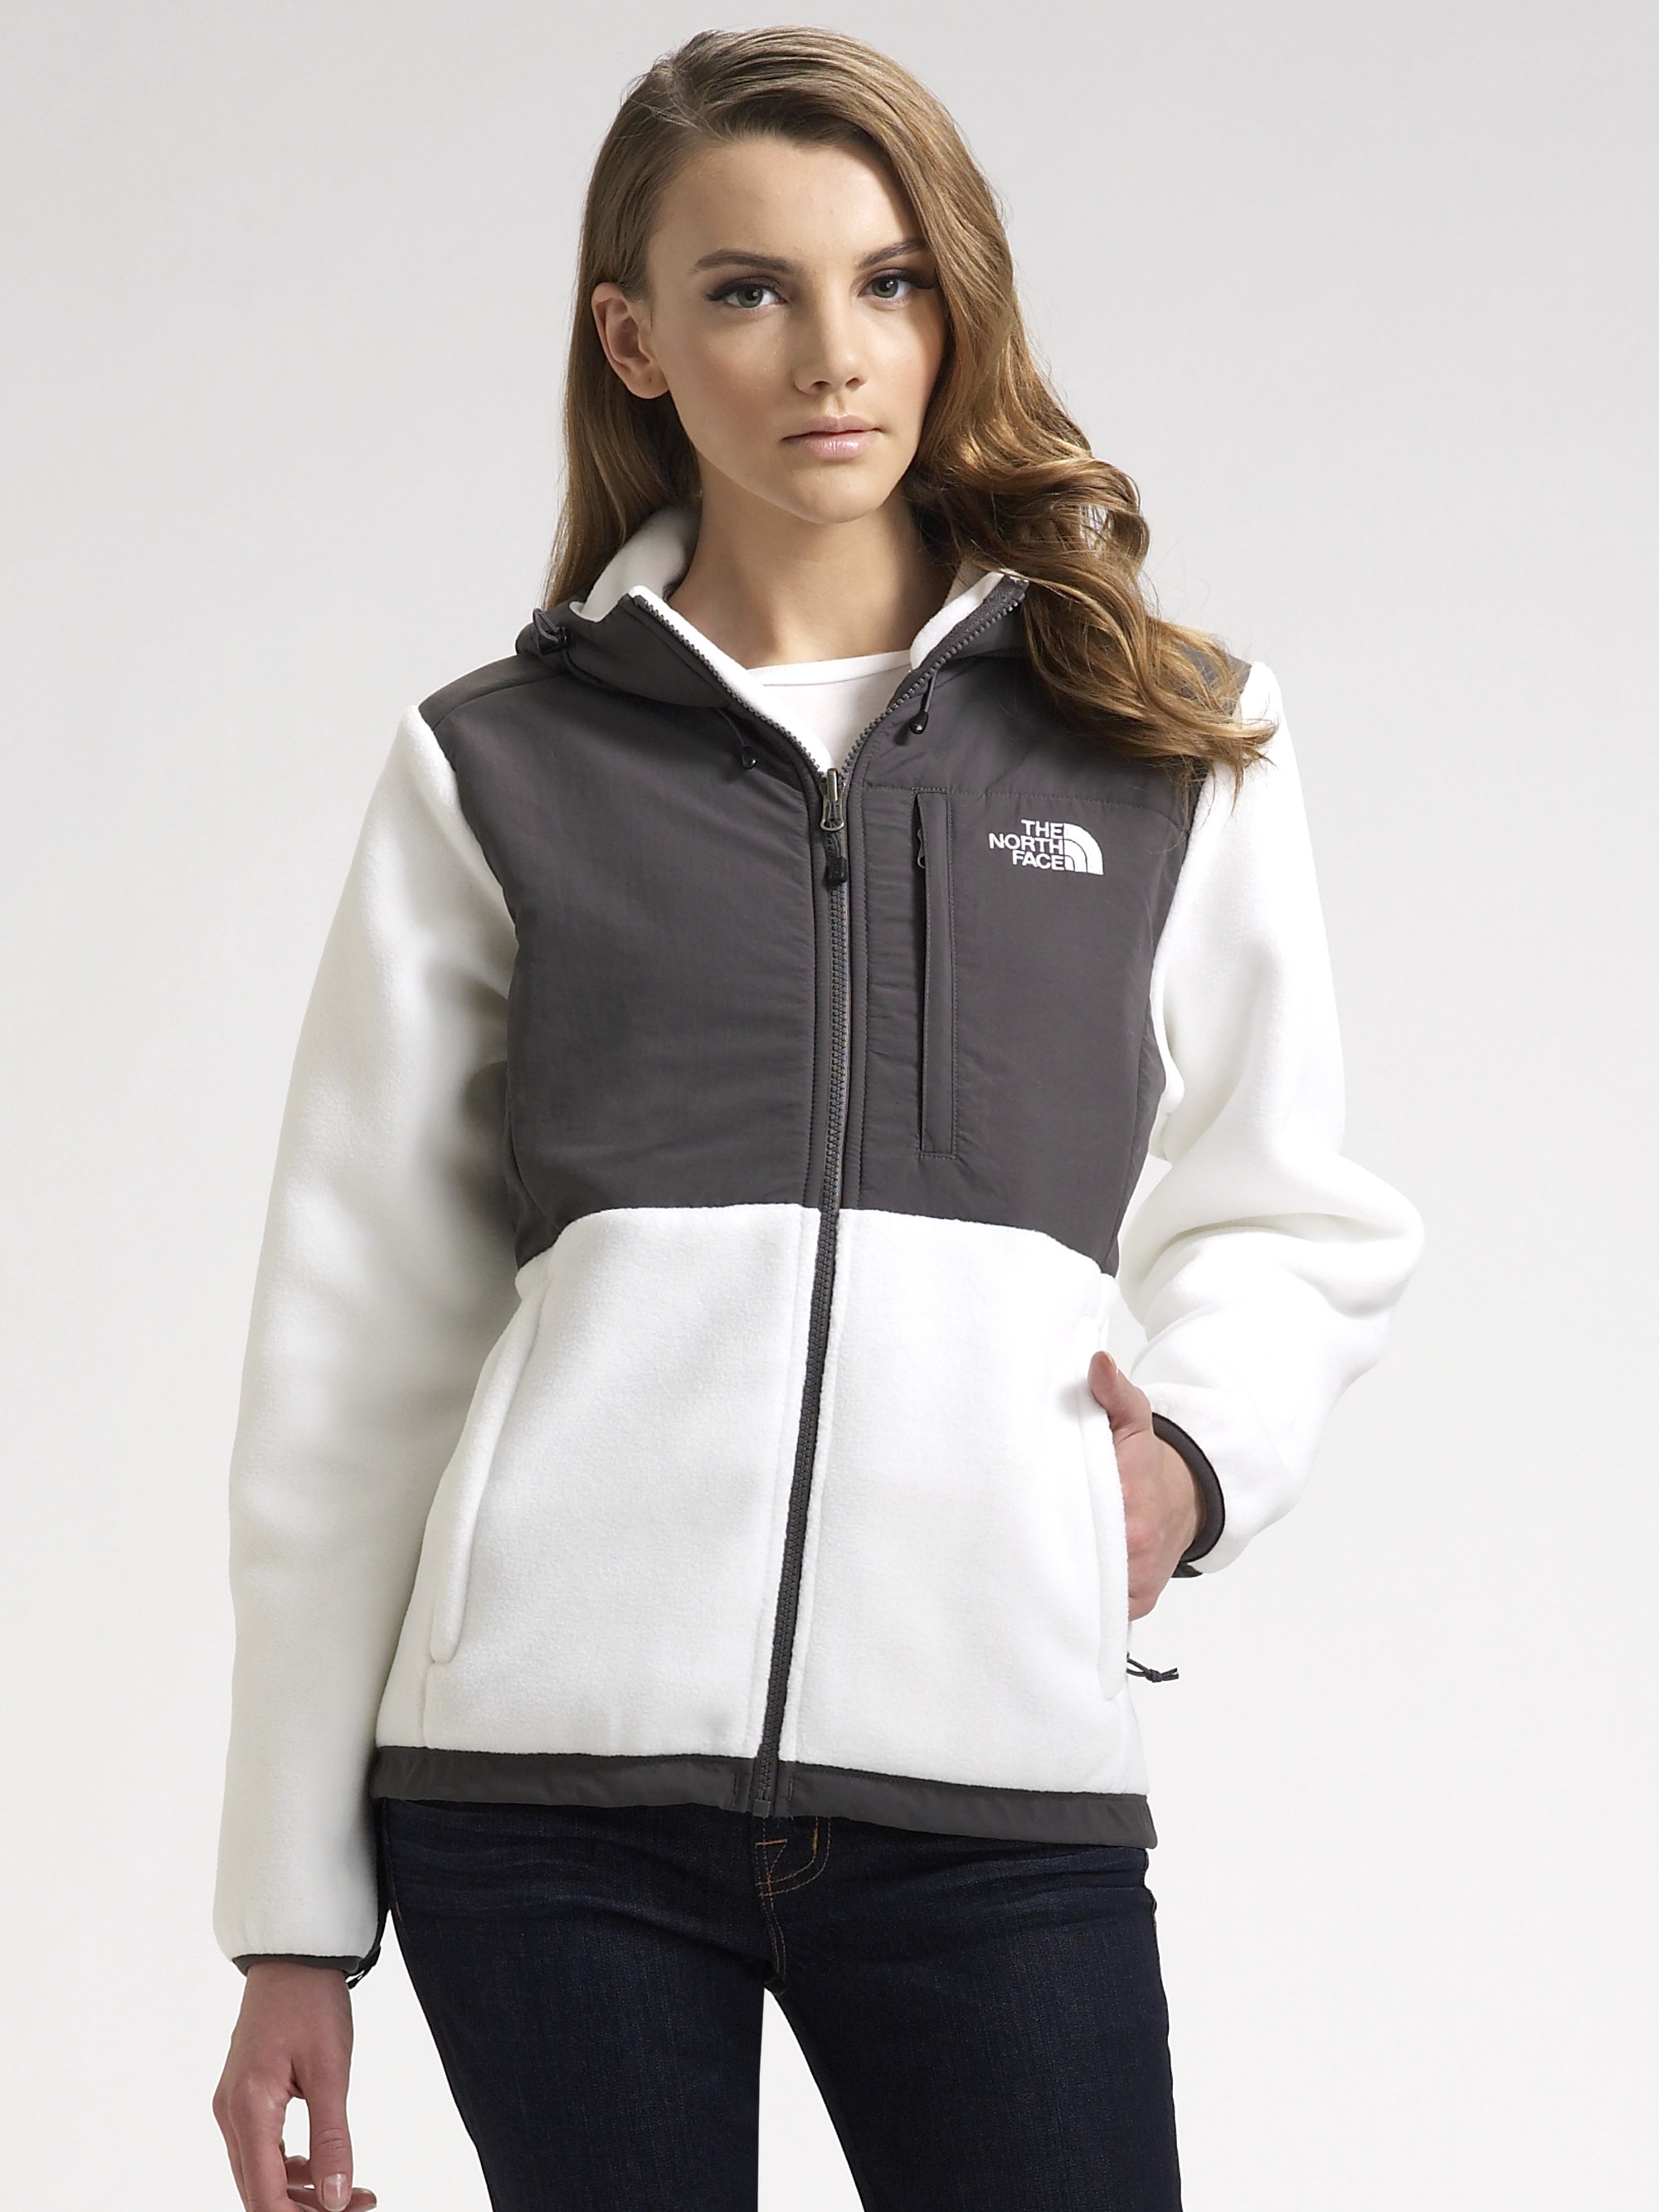 grey and white north face jacket